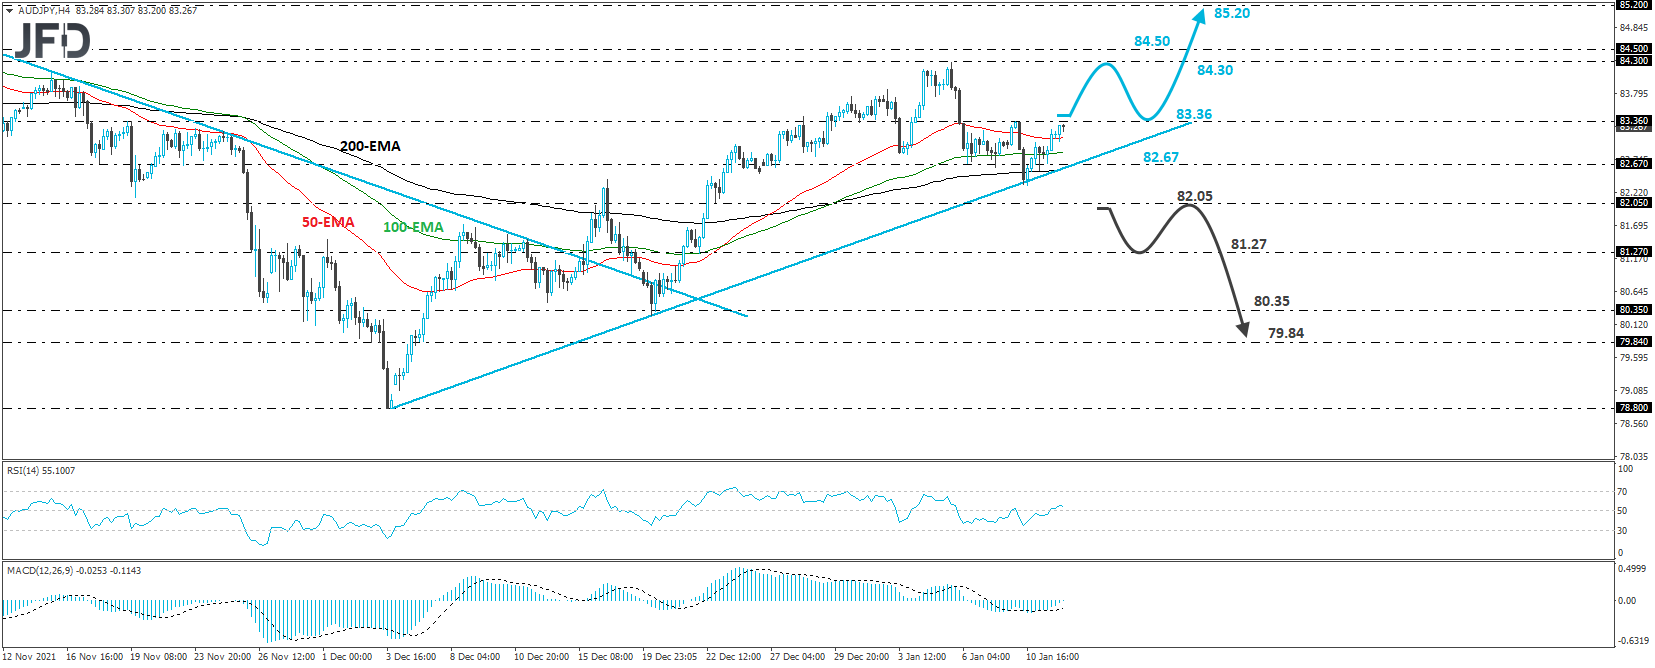 AUD/JPY 4-hour chart technical analysis.